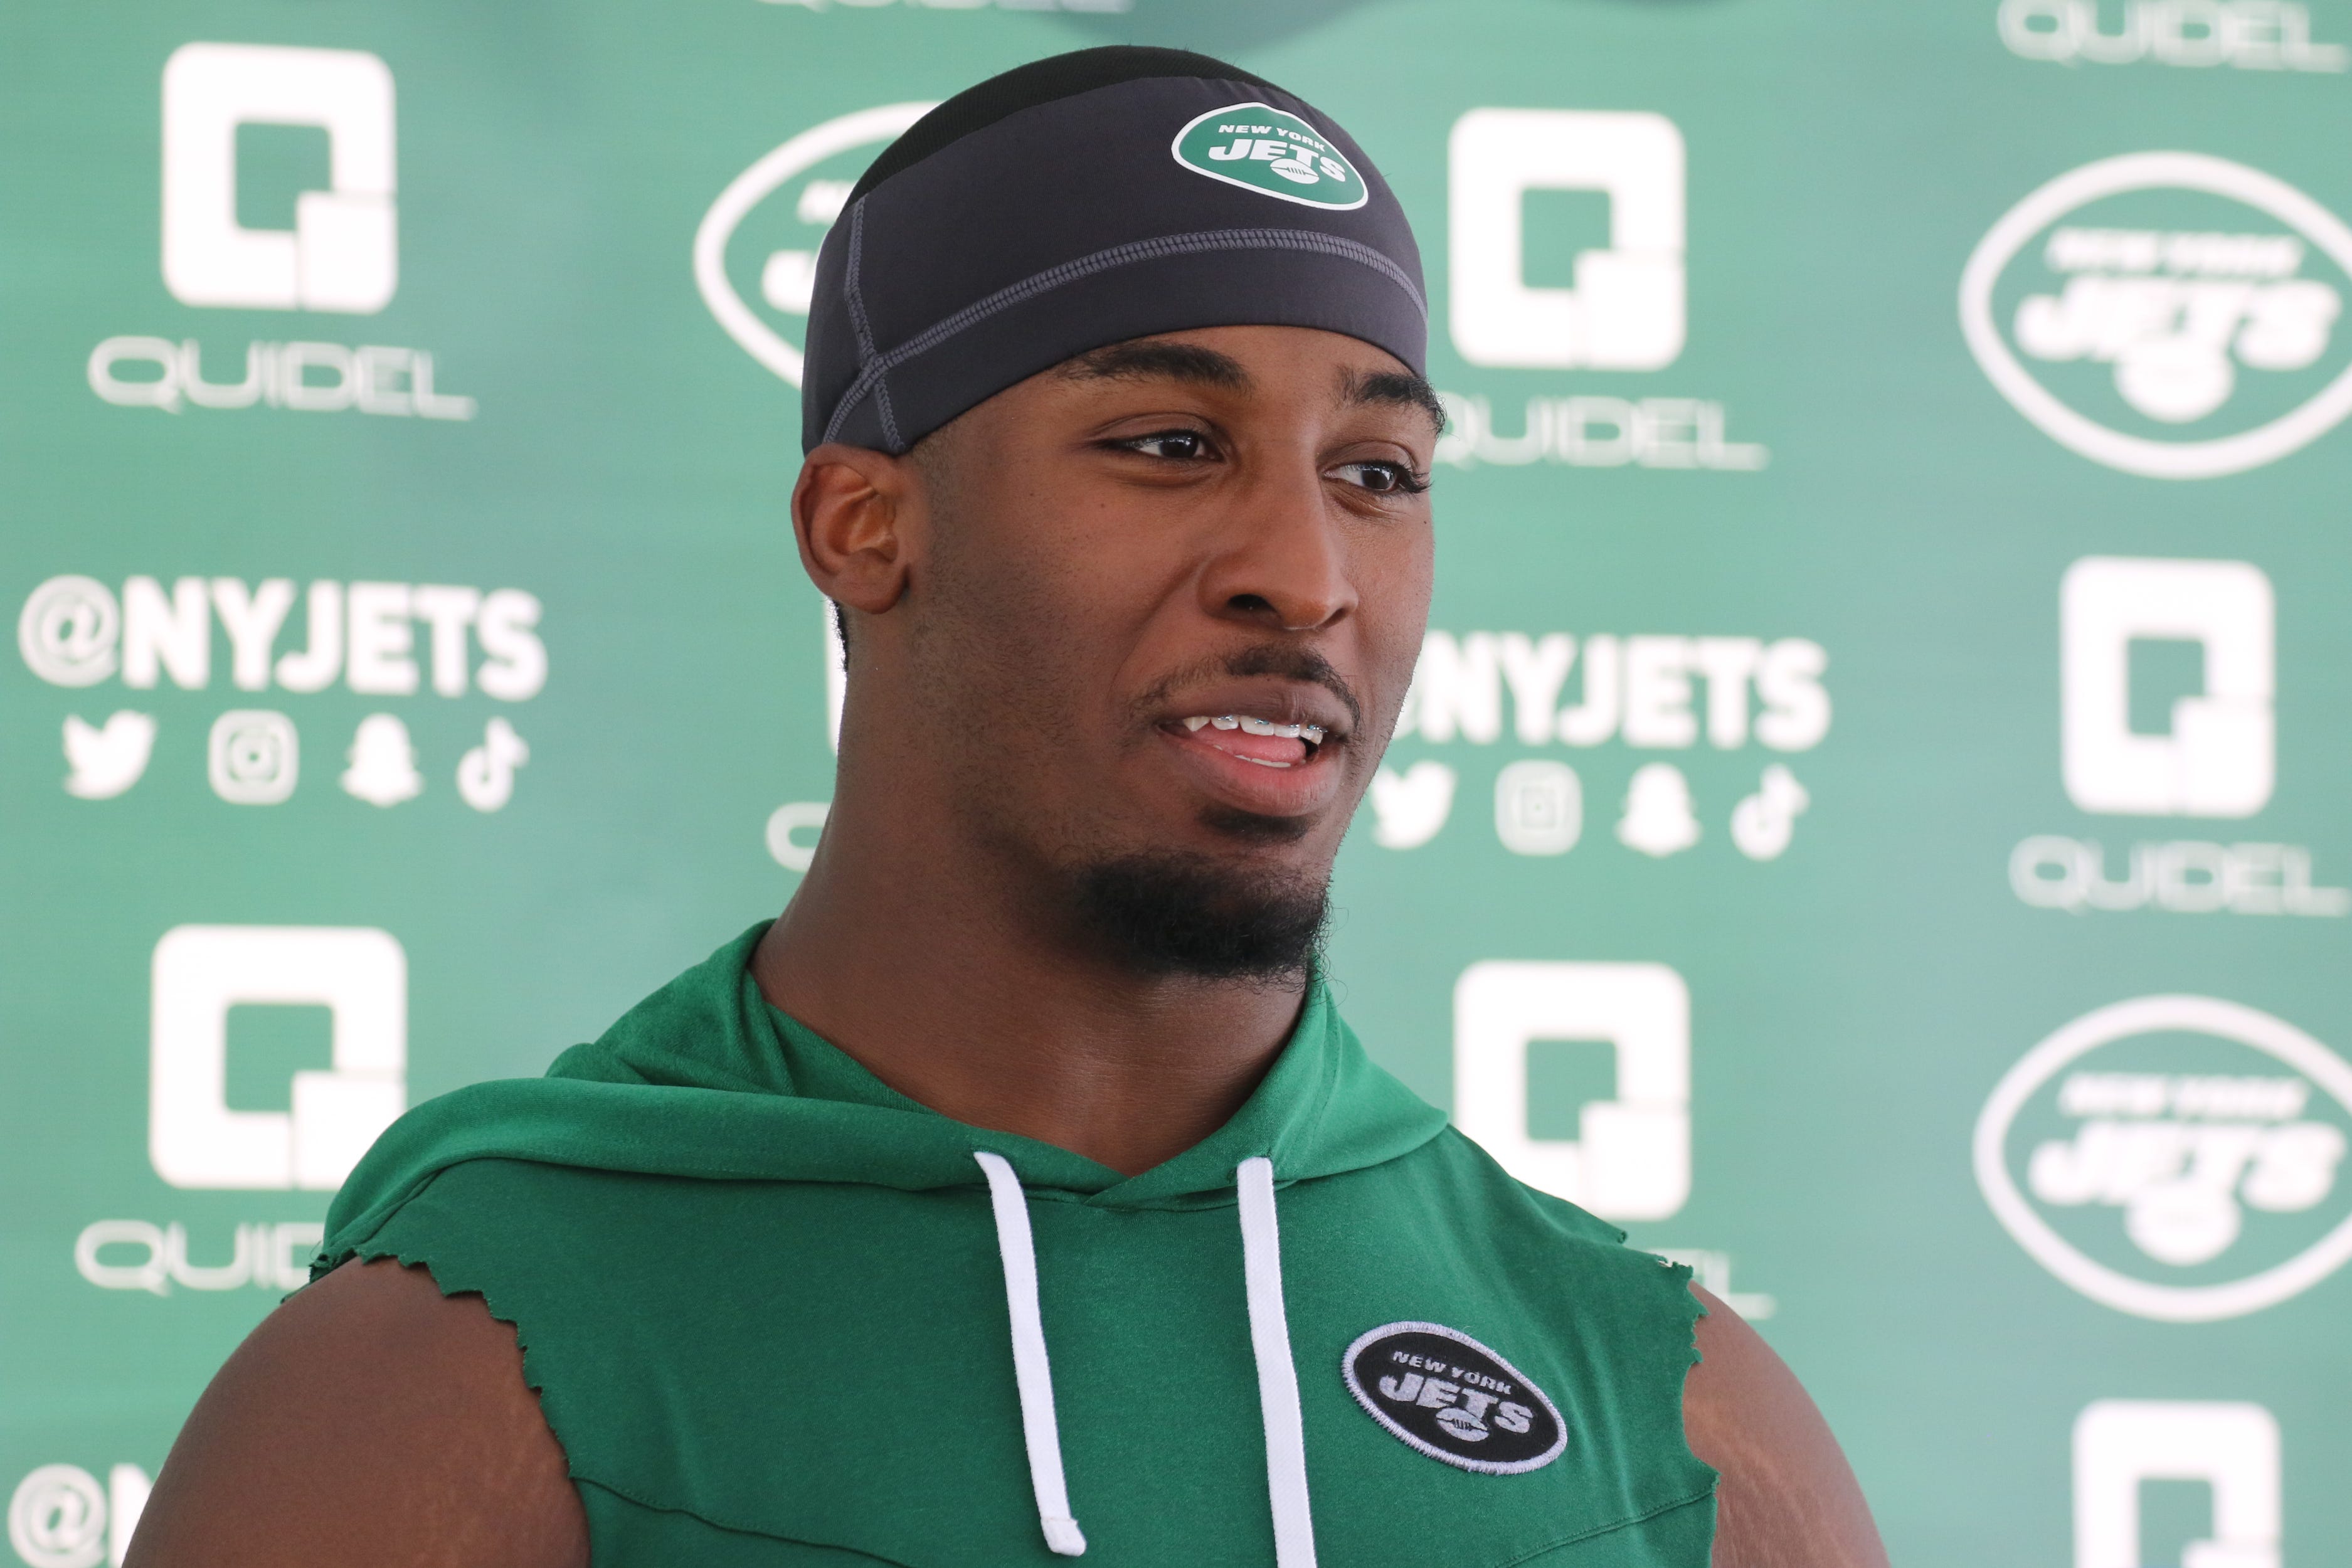 Running back Breece Hall answers questions after practice. Jet Fan Fest took place at the 2022 New York Jets Training Camp in Florham Park, NJ on July 30, 2022.&nbsp;